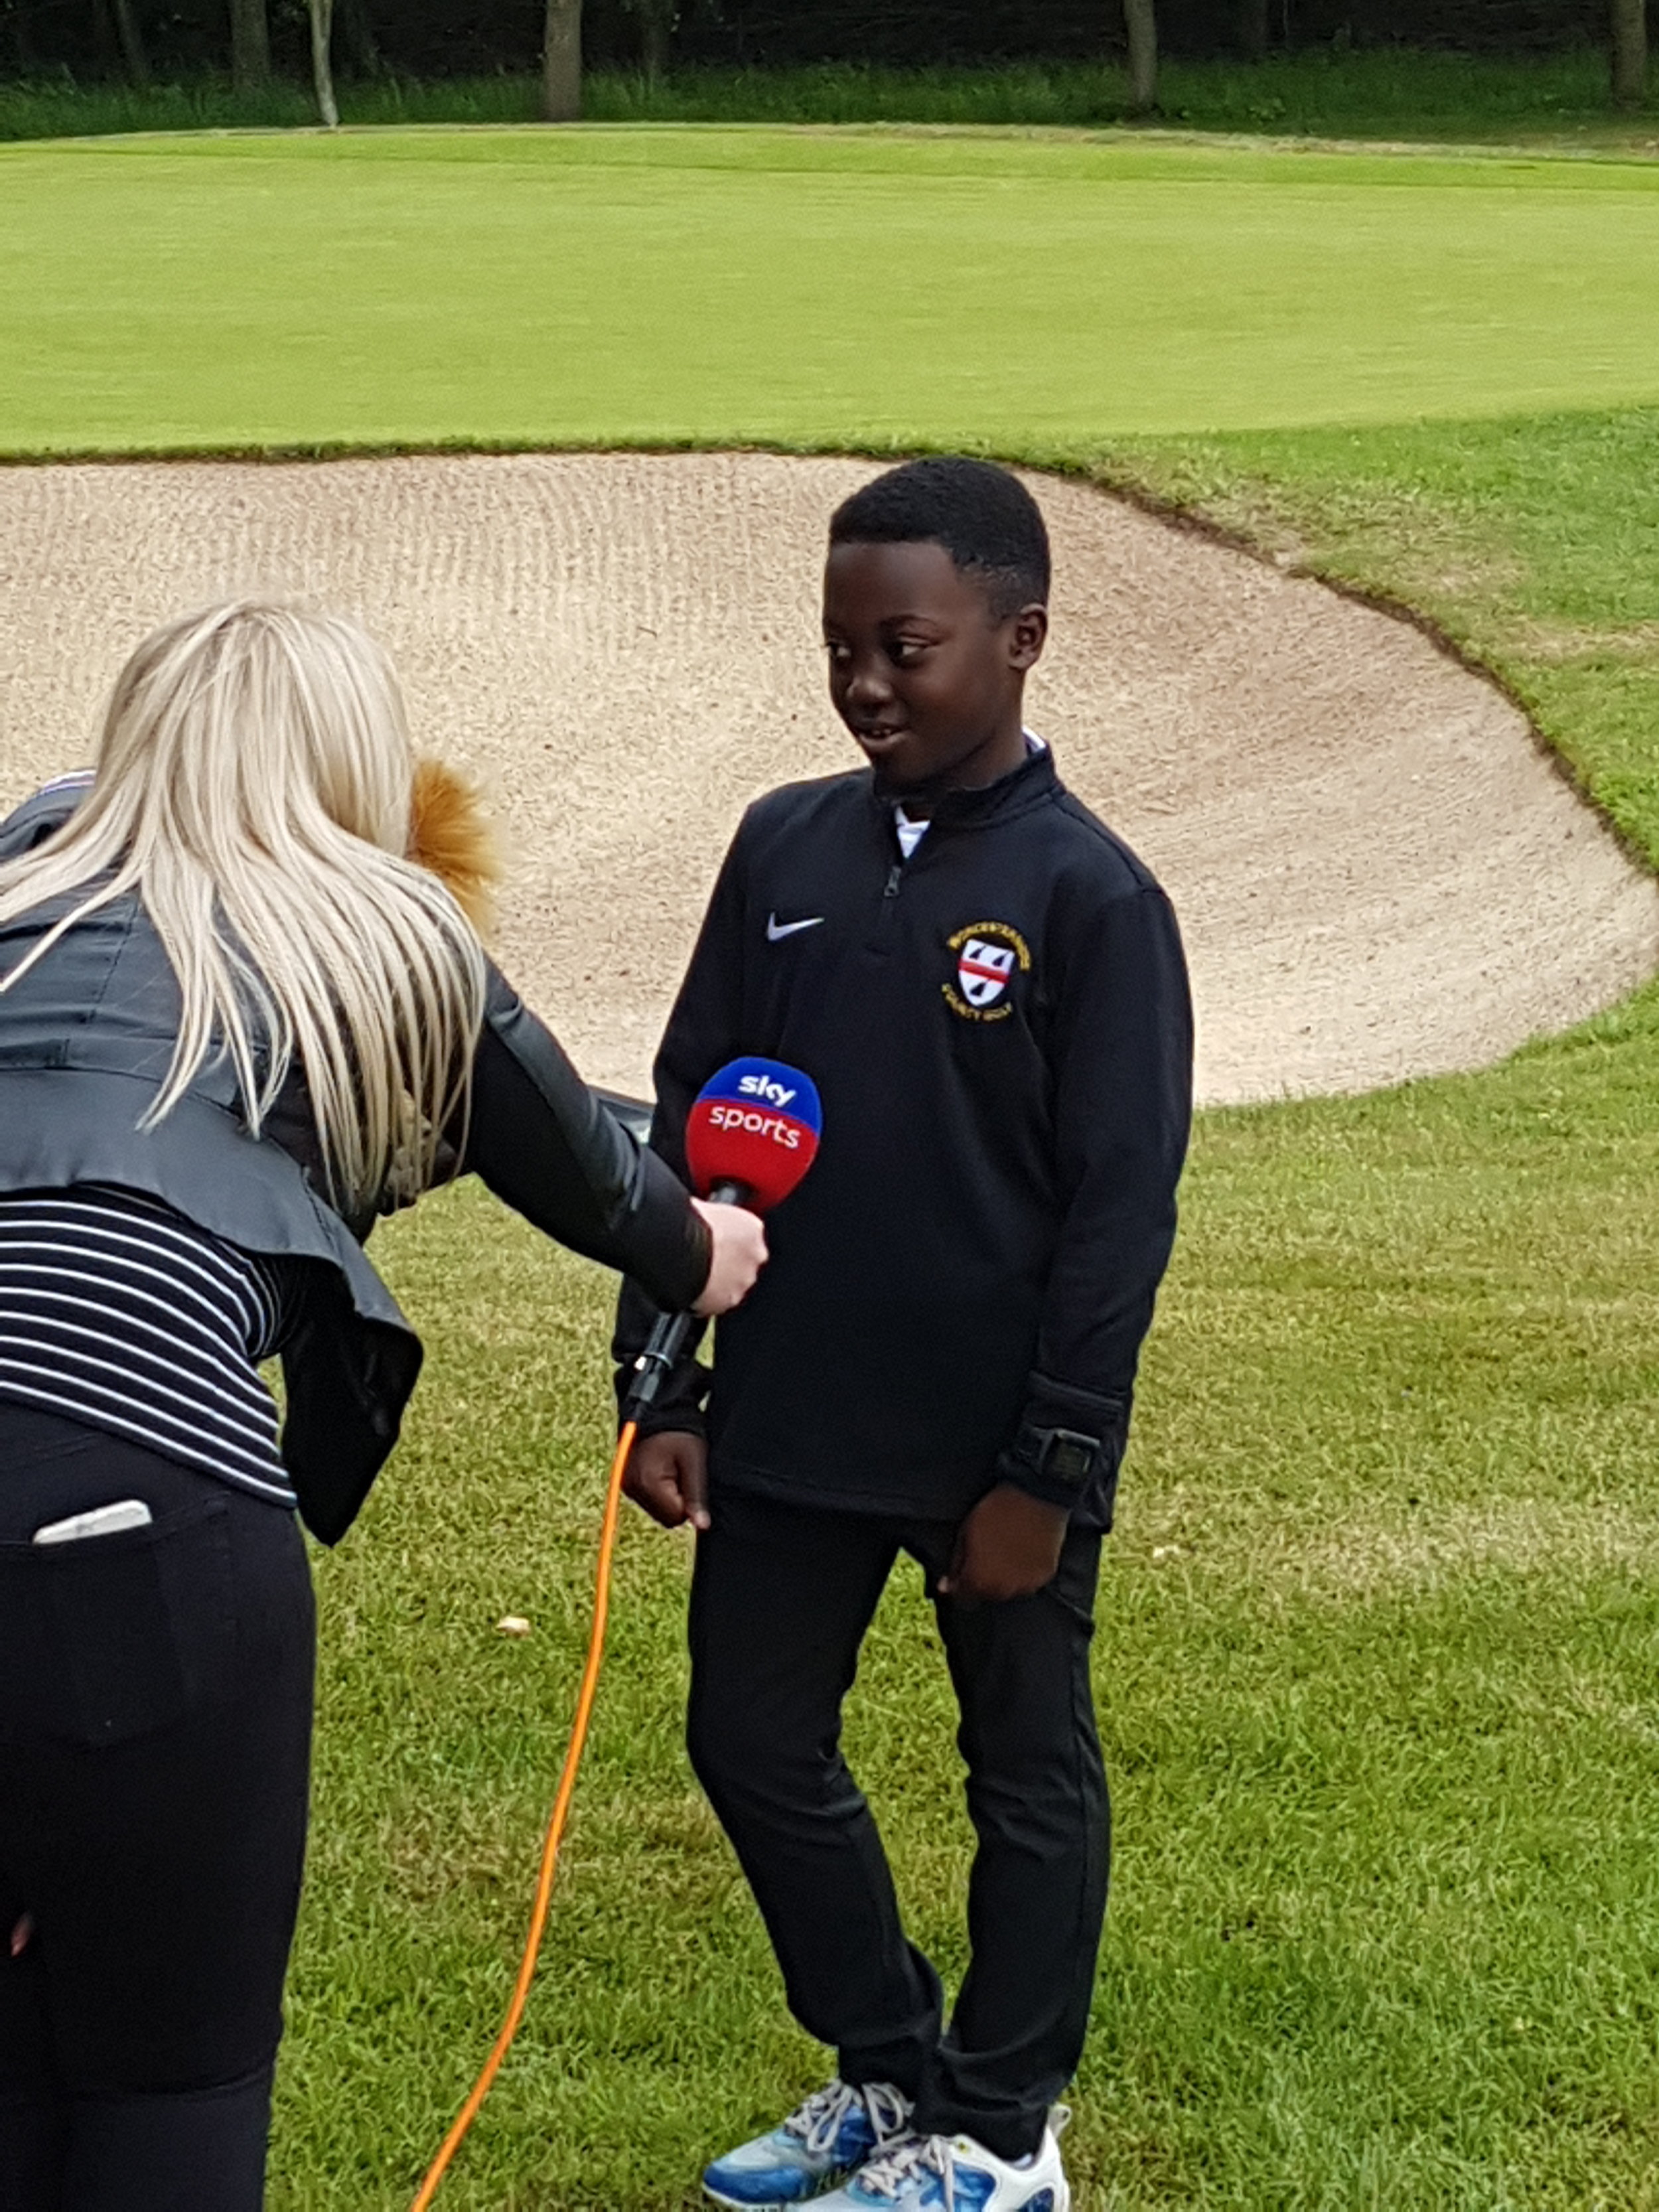 2018 SarfoGolf filming on Father's Day with Kirsty Edwards Sky Sports  